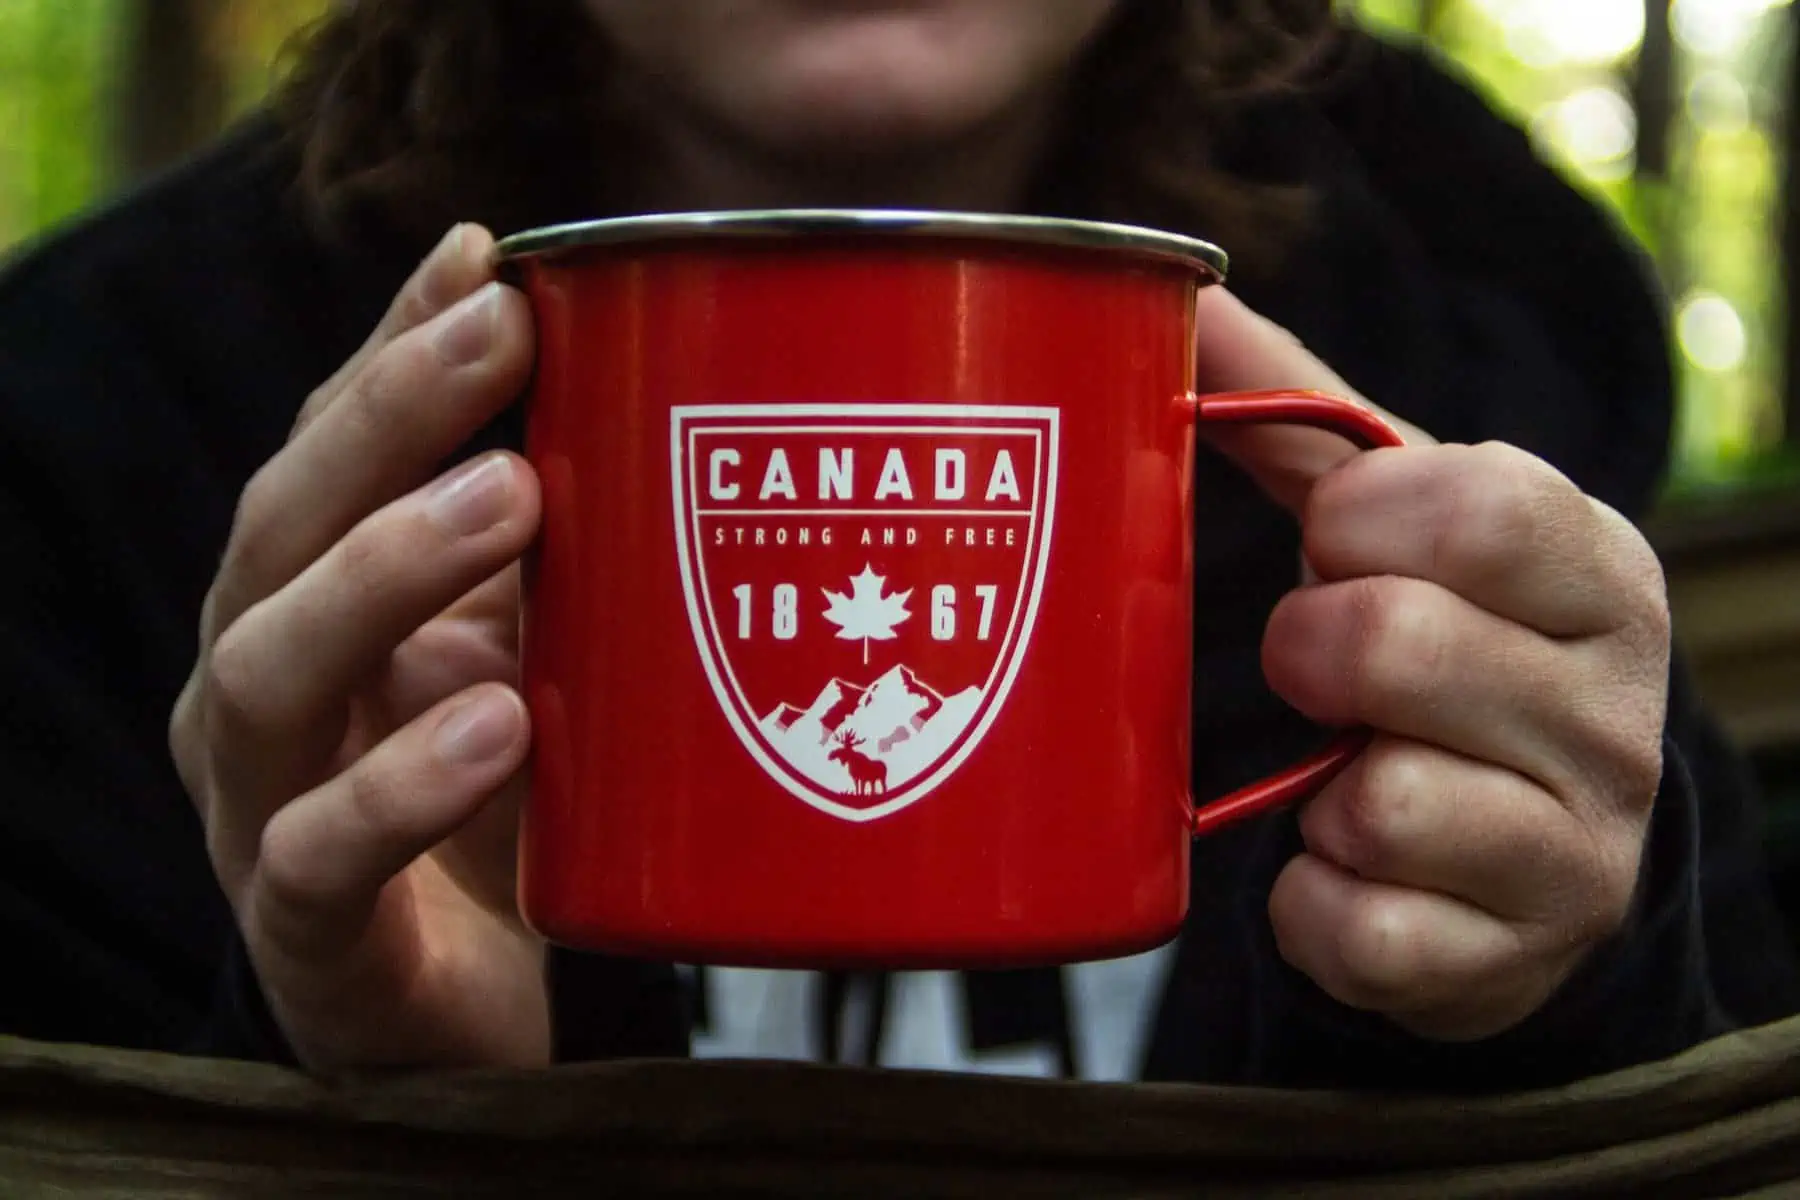 Hands holding a red cup that says "Canada, Strong and Free, 1867"